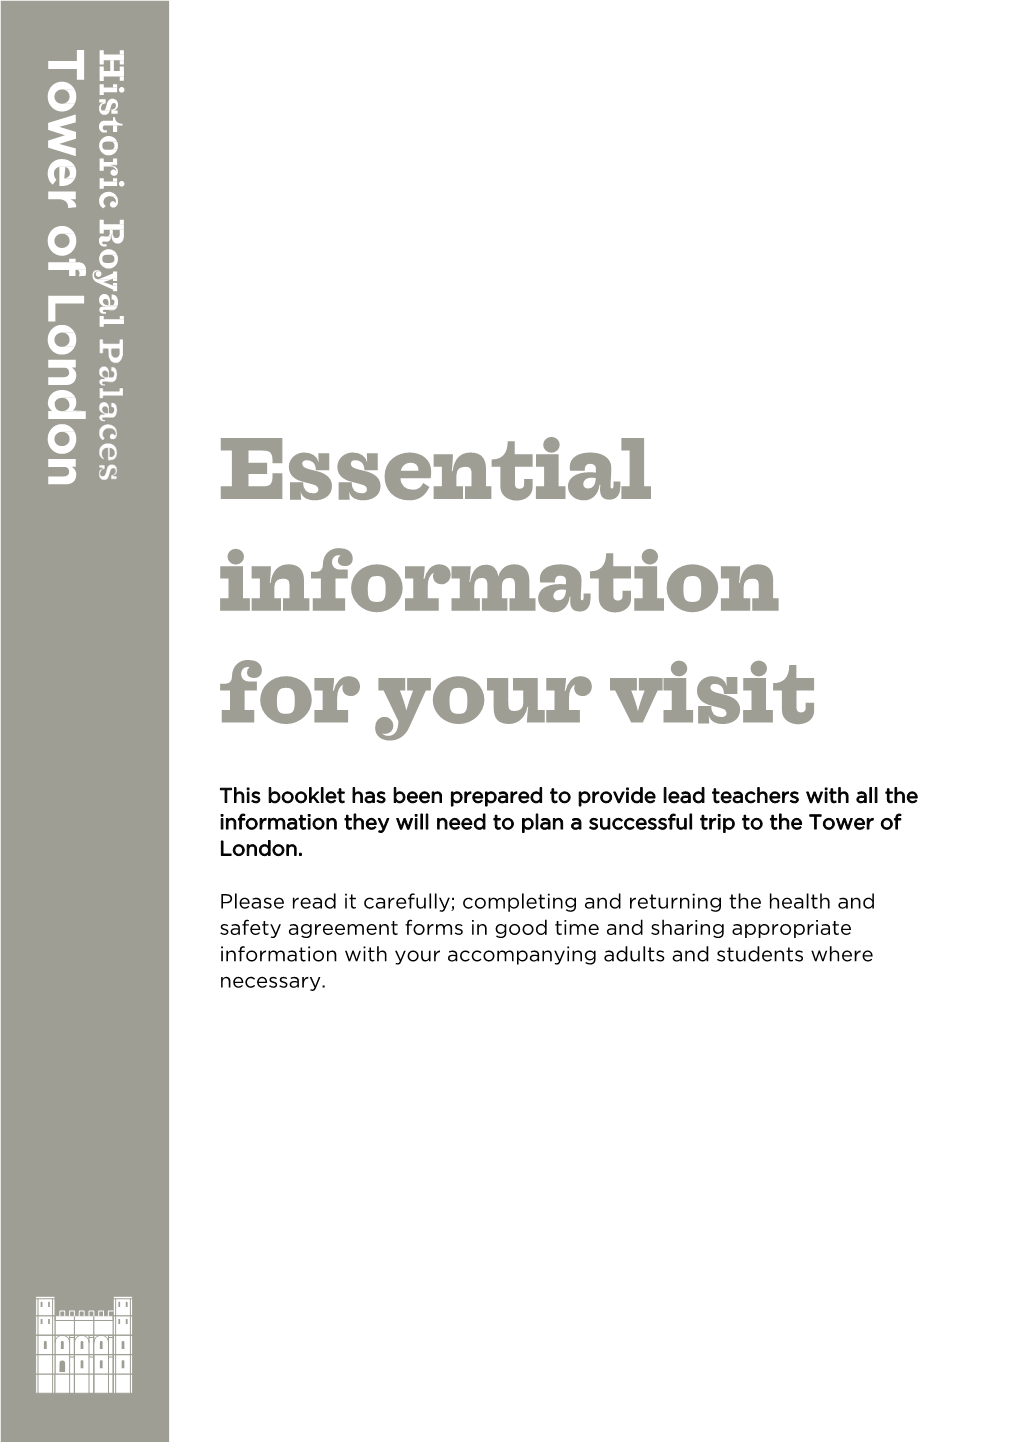 Essential Information for Your Visit